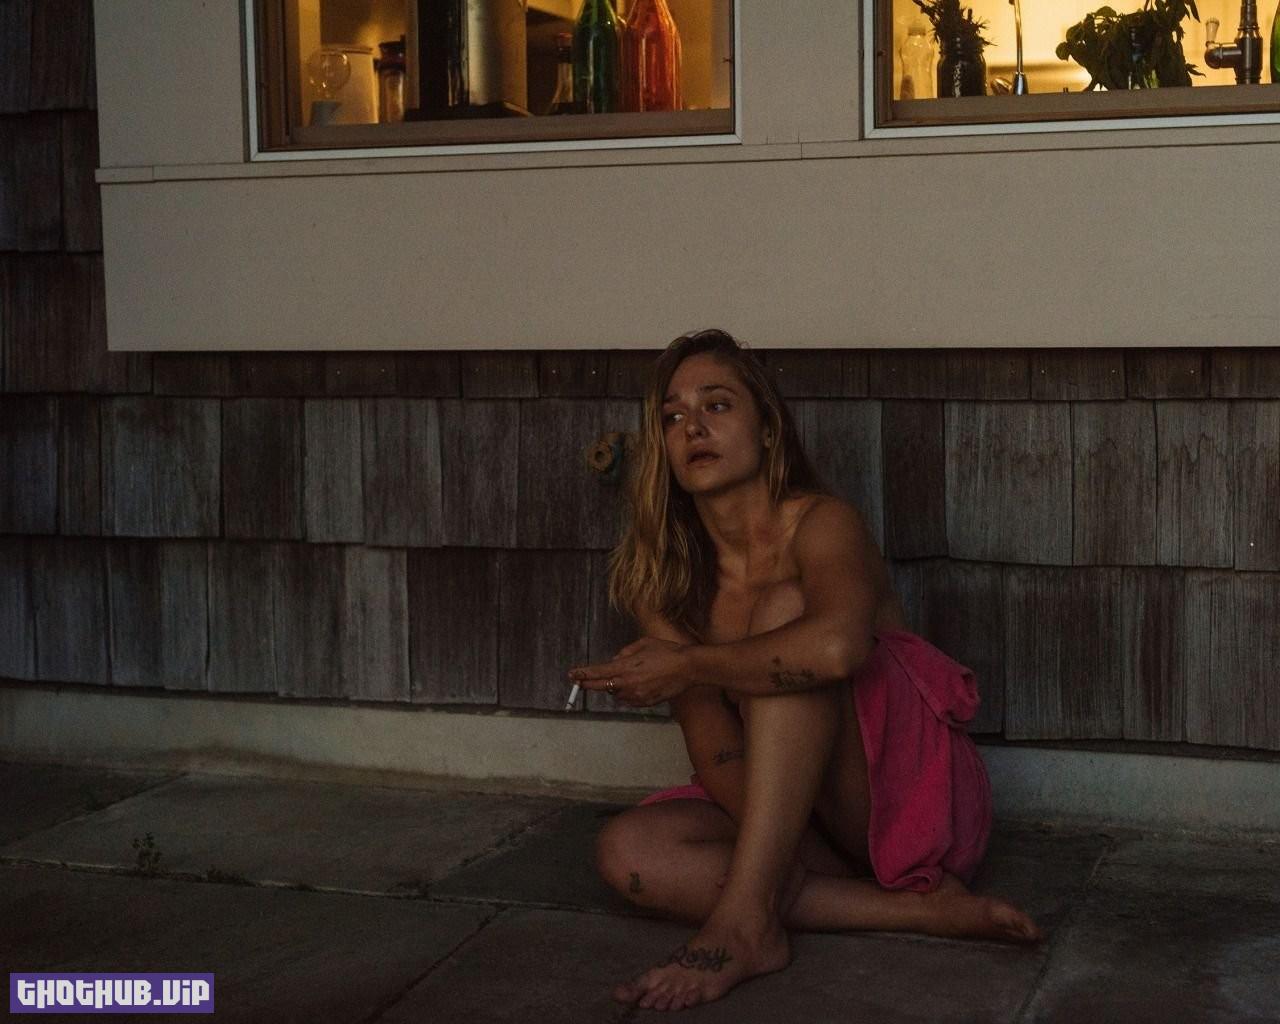 1702258001 483 Jemima Kirke The Fappening Nude Leaked 73 Photos